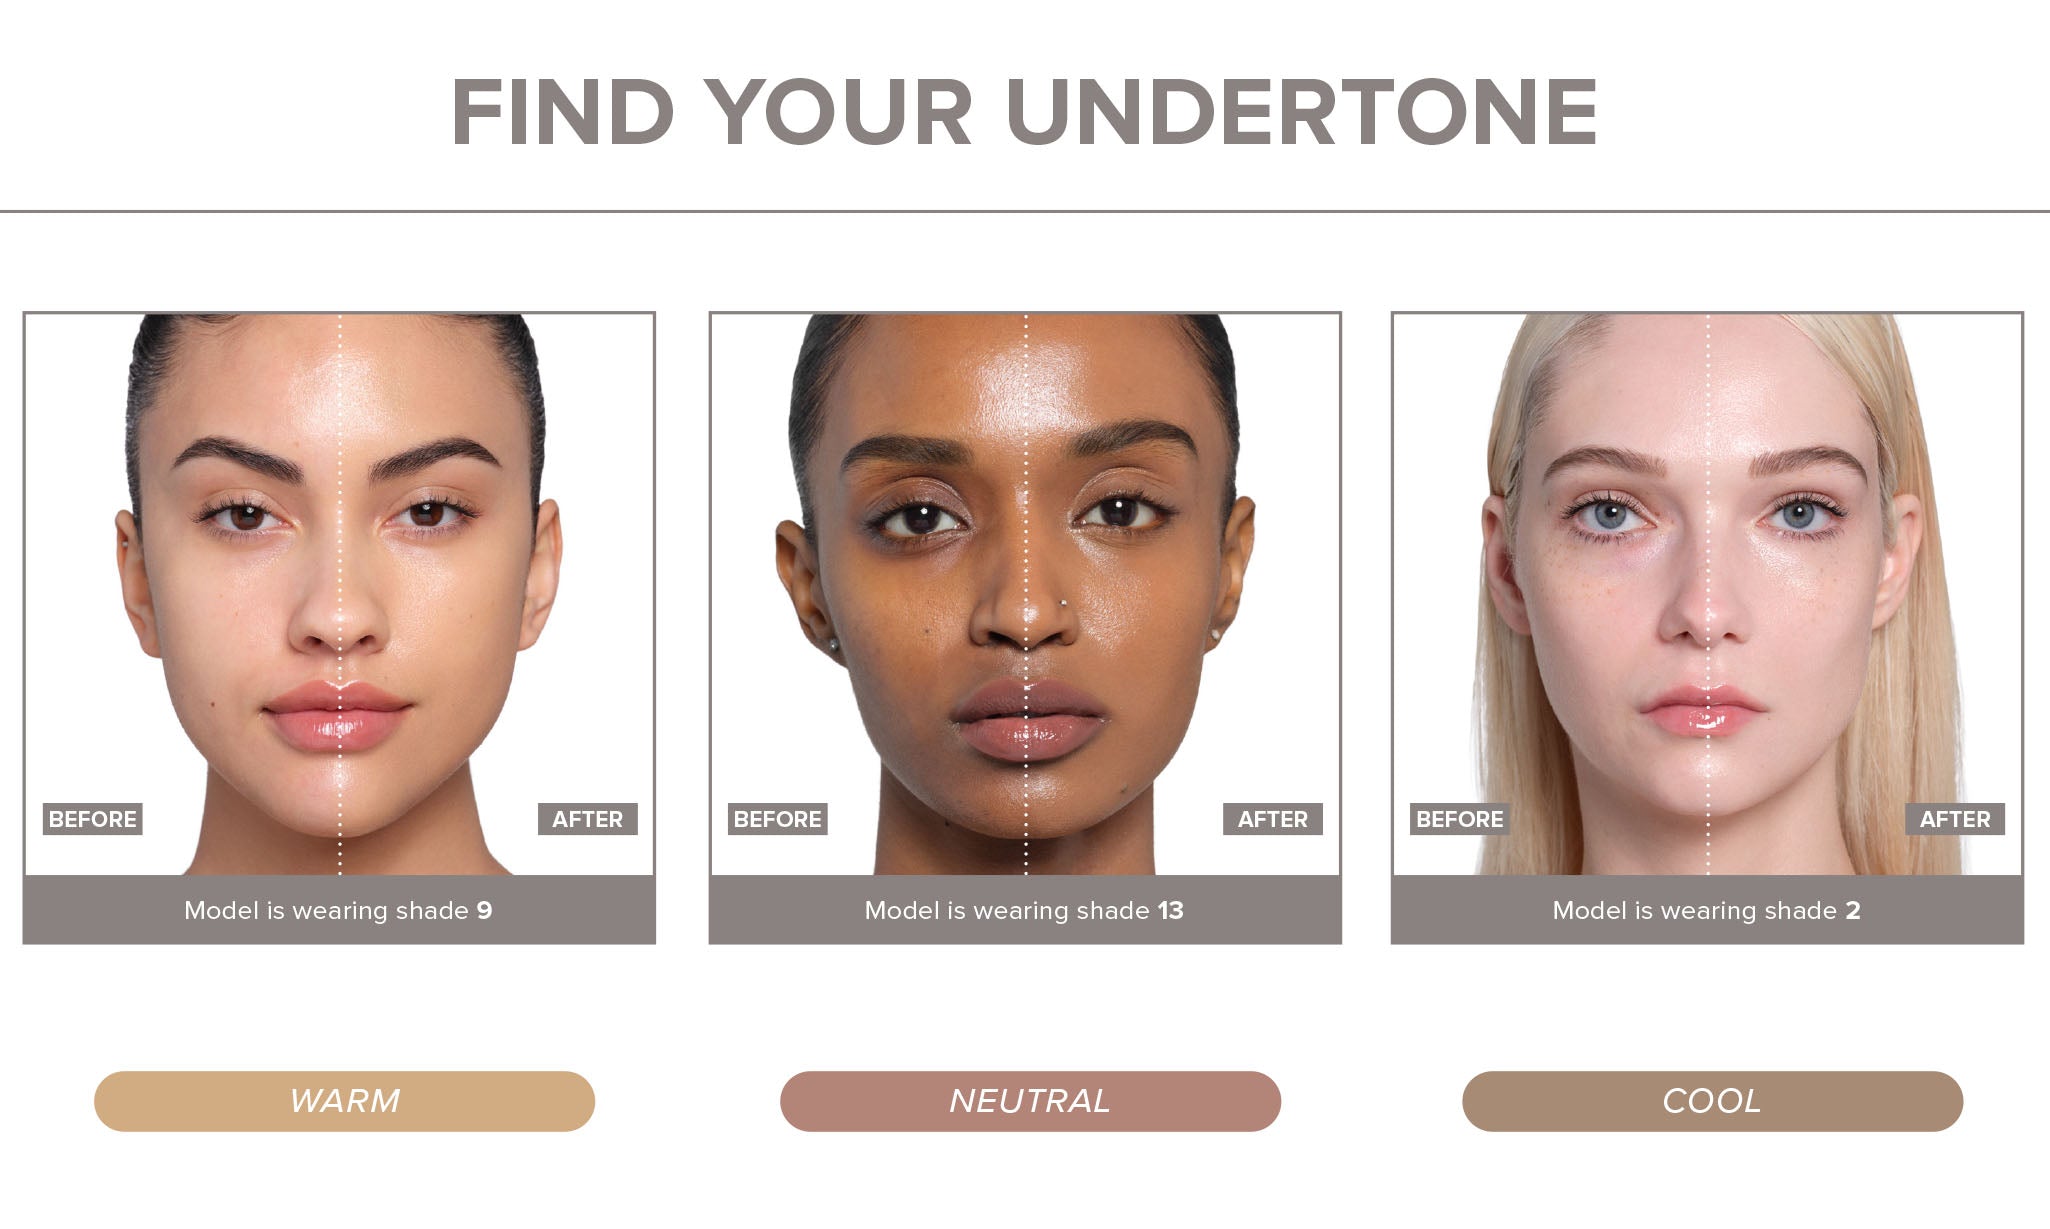 Beauty Balm - Find Your Undertone: Warm, Neutral, Cool